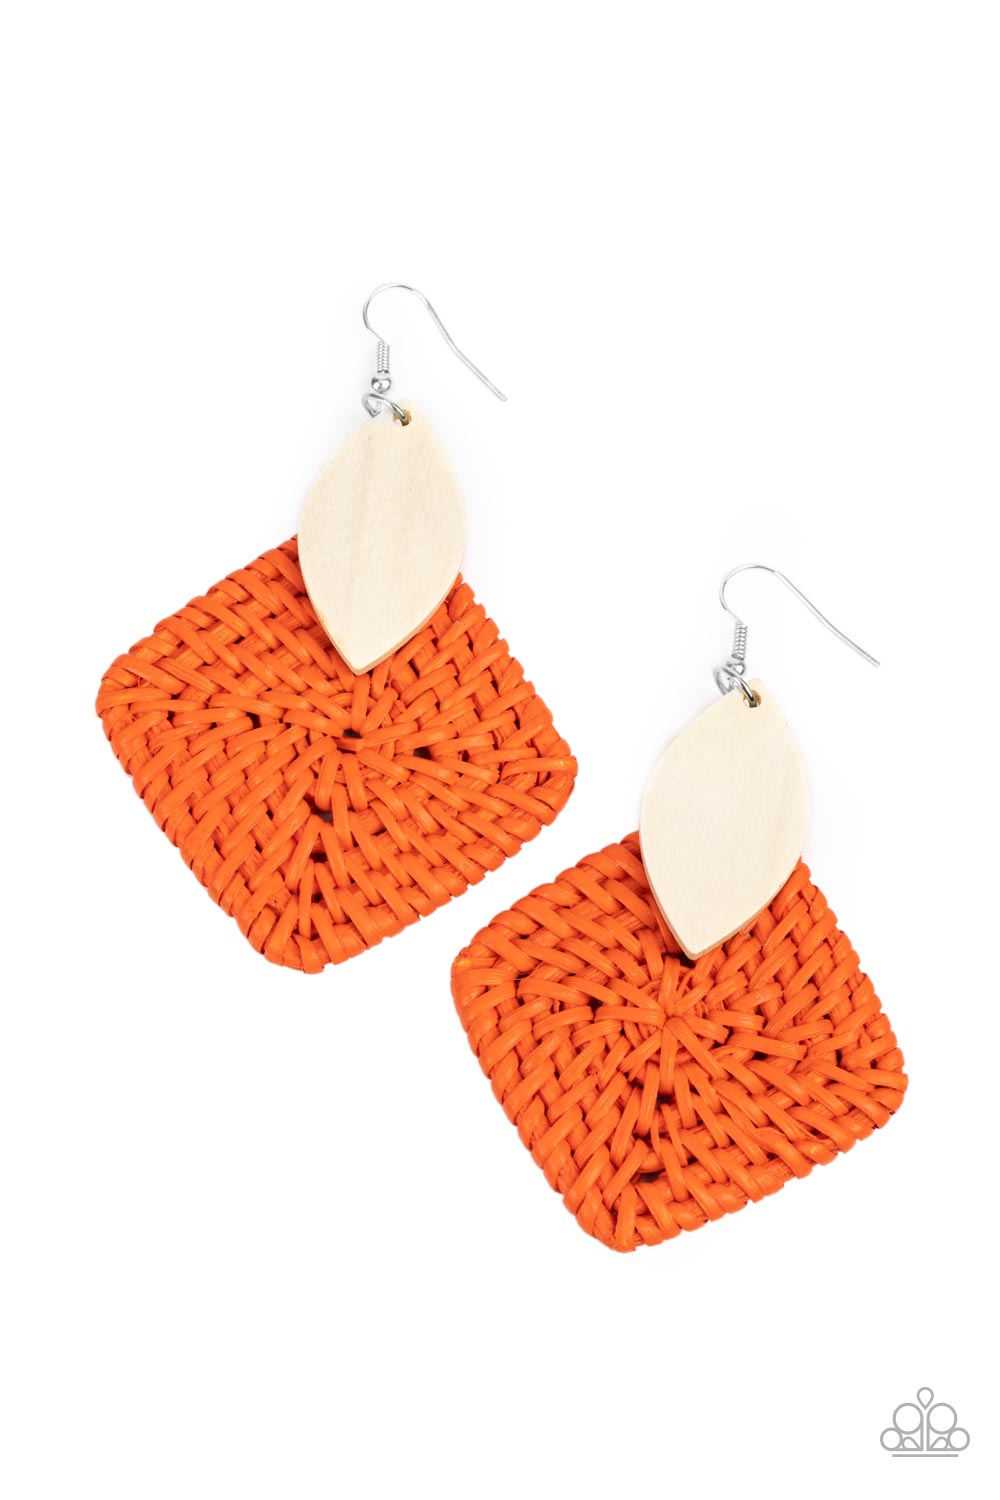 Sabbatical WEAVE - Orange and White Wood Earrings - Paparazzi Accessories